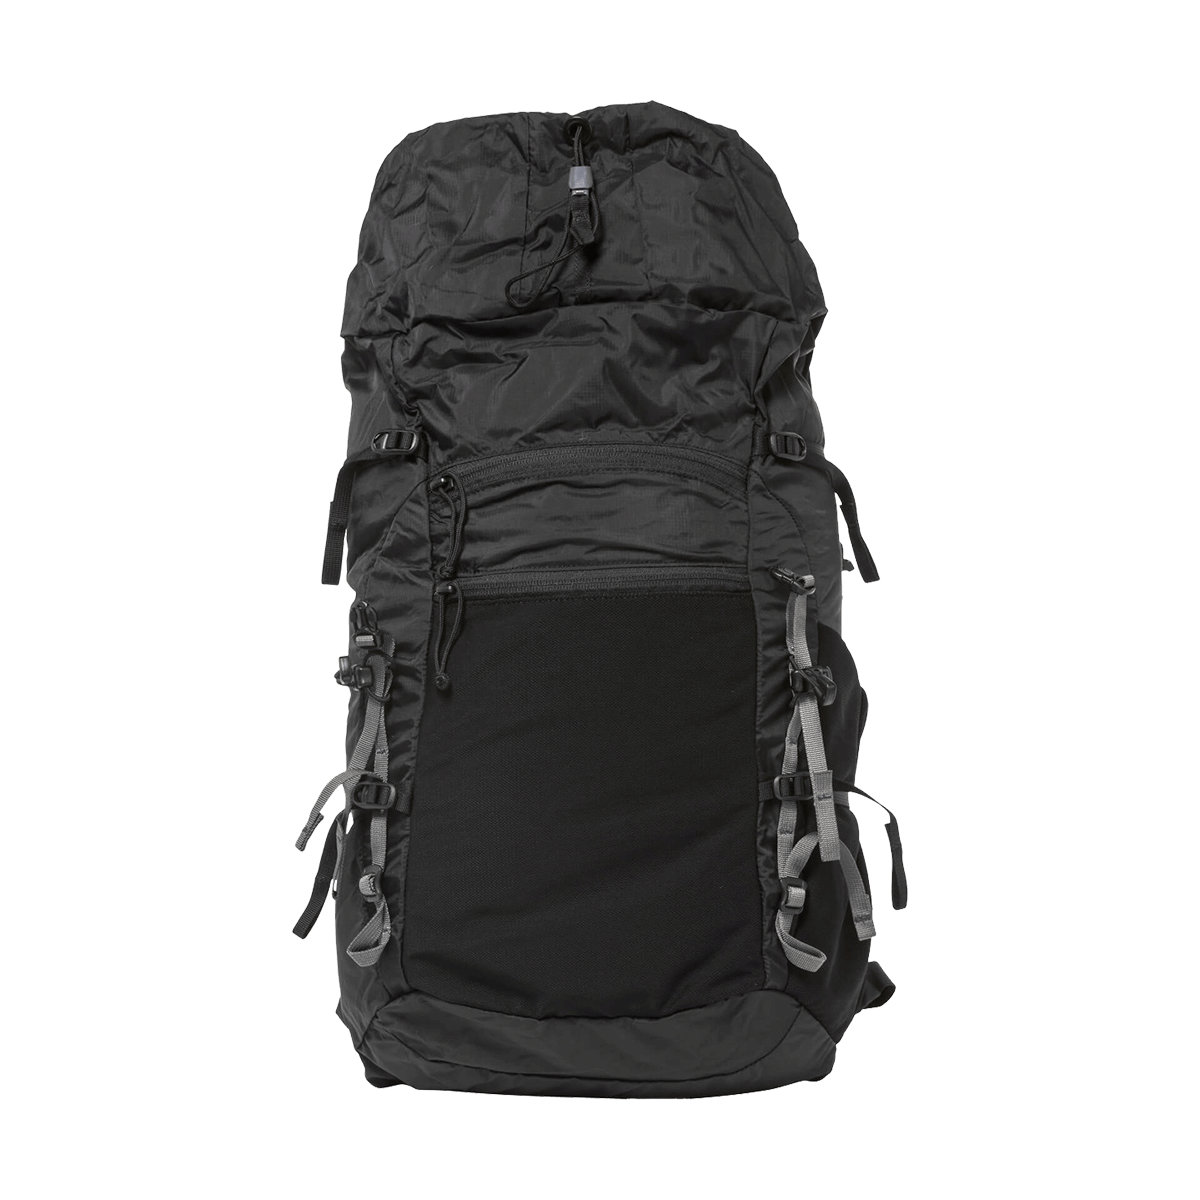 MYSTERY RANCH IN & OUT BACKPACK - 22L